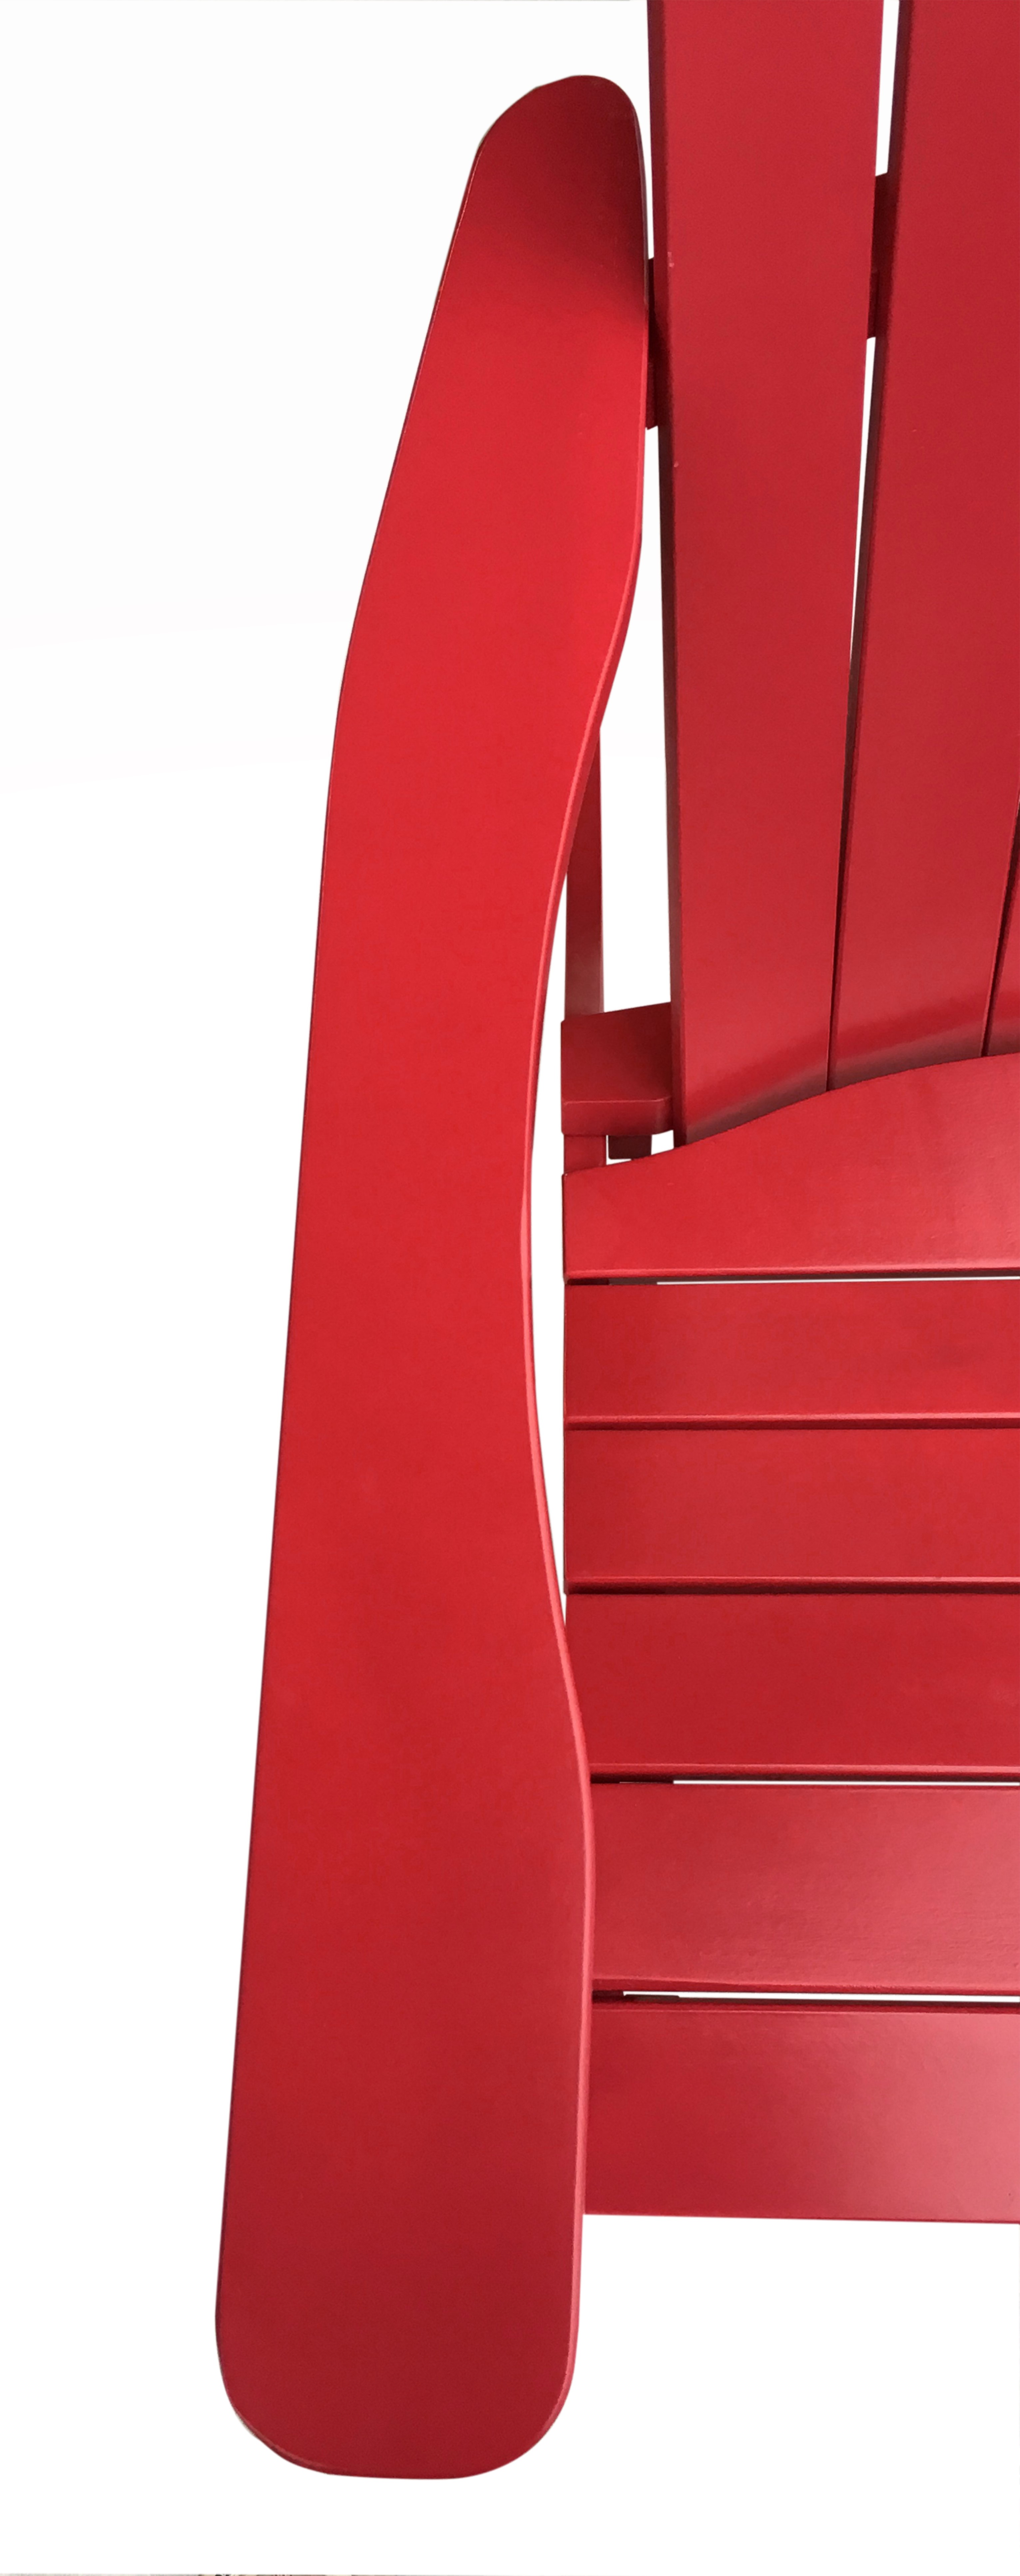 Mainstays Wood Outdoor Adirondack Chair, Red Color - image 3 of 8